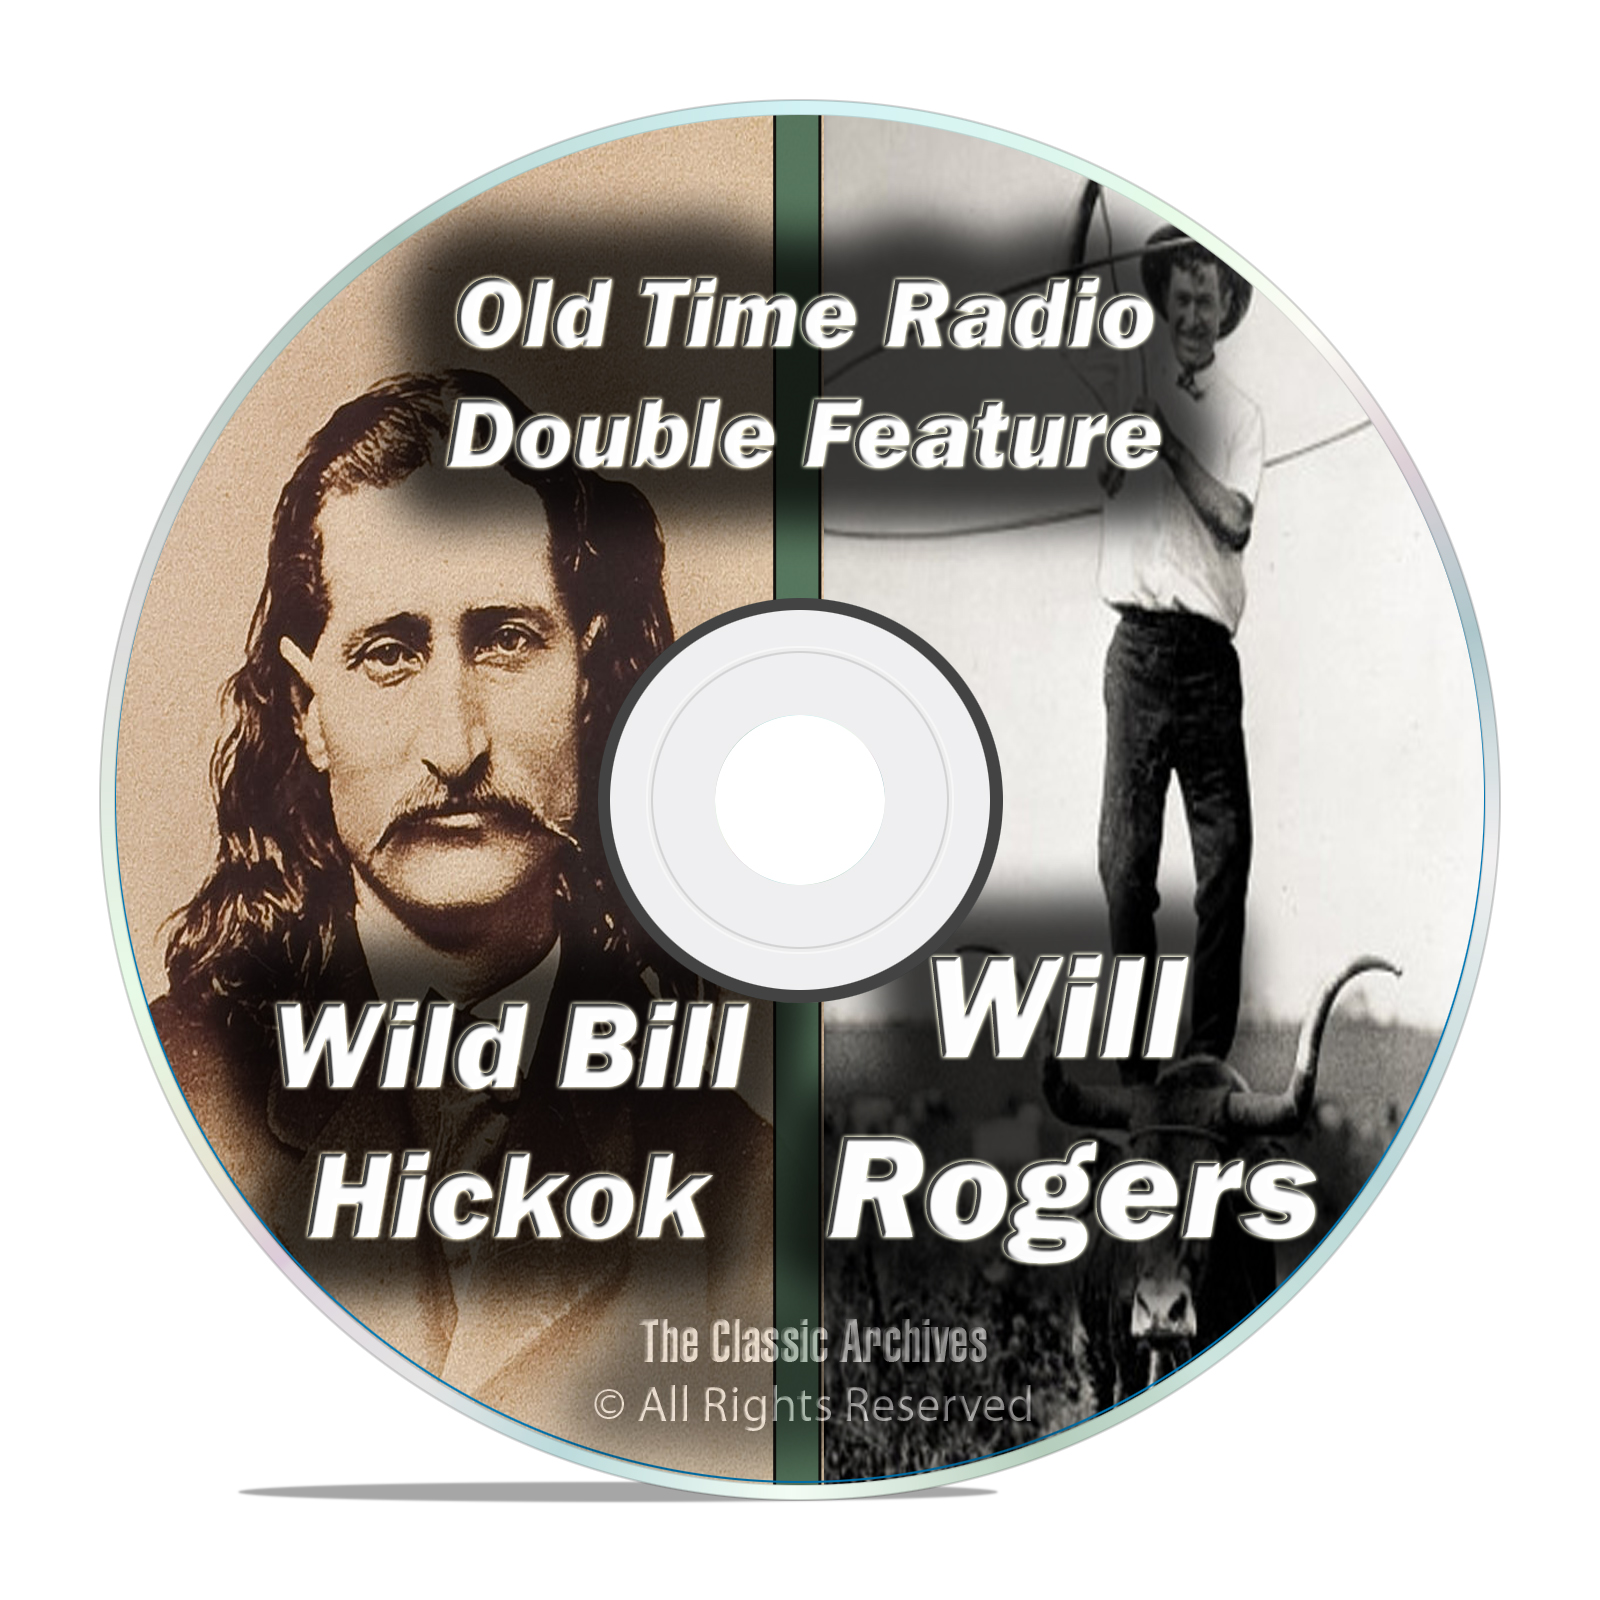 Wild Bill Hickok, Will Rogers, 426 FULL RUN Old Time Radio Shows MP3 DVD